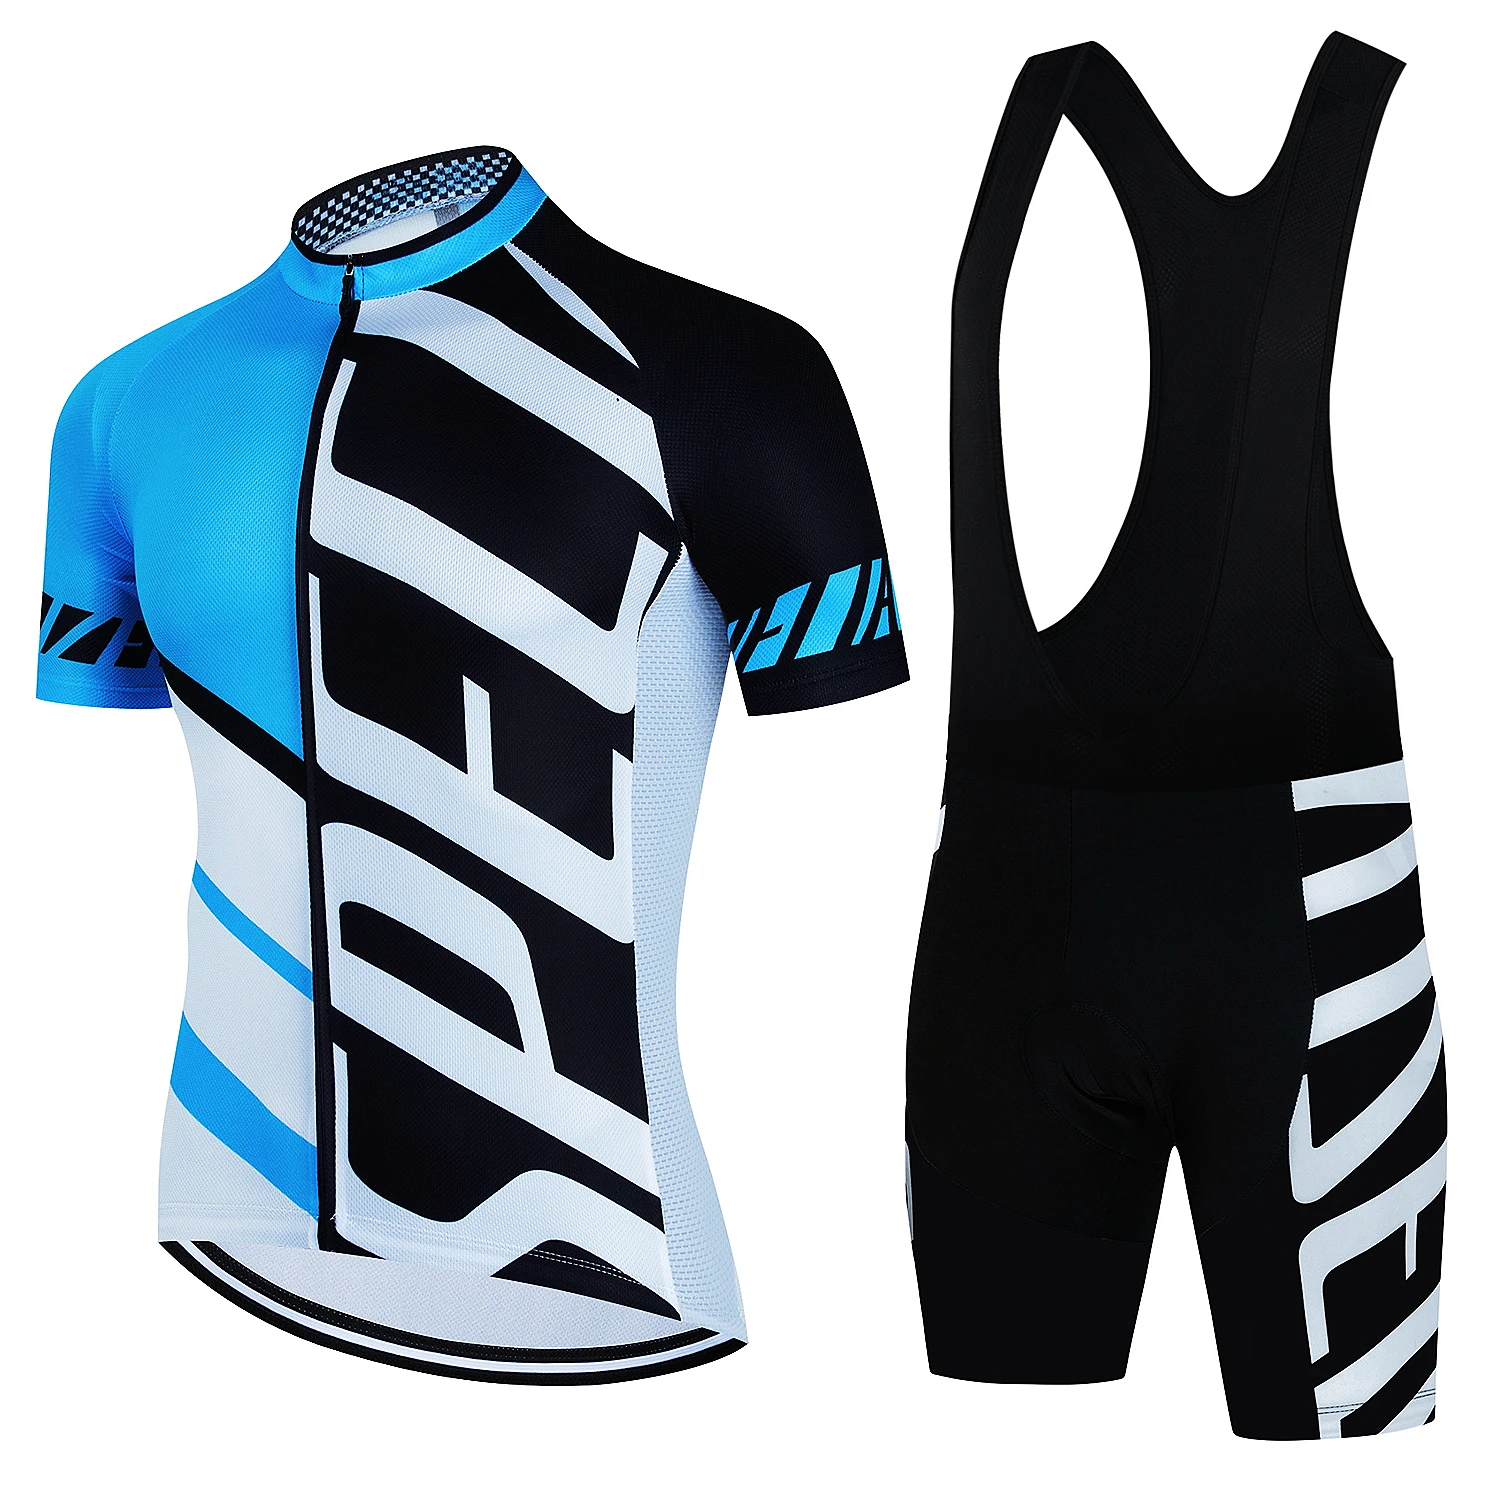 Pro Team Cycling Jersey Sets Summer Short Sleeve Breathable Men’s MTB Bike Cycling Clothing Maillot Ropa Ciclismo Uniform Suits